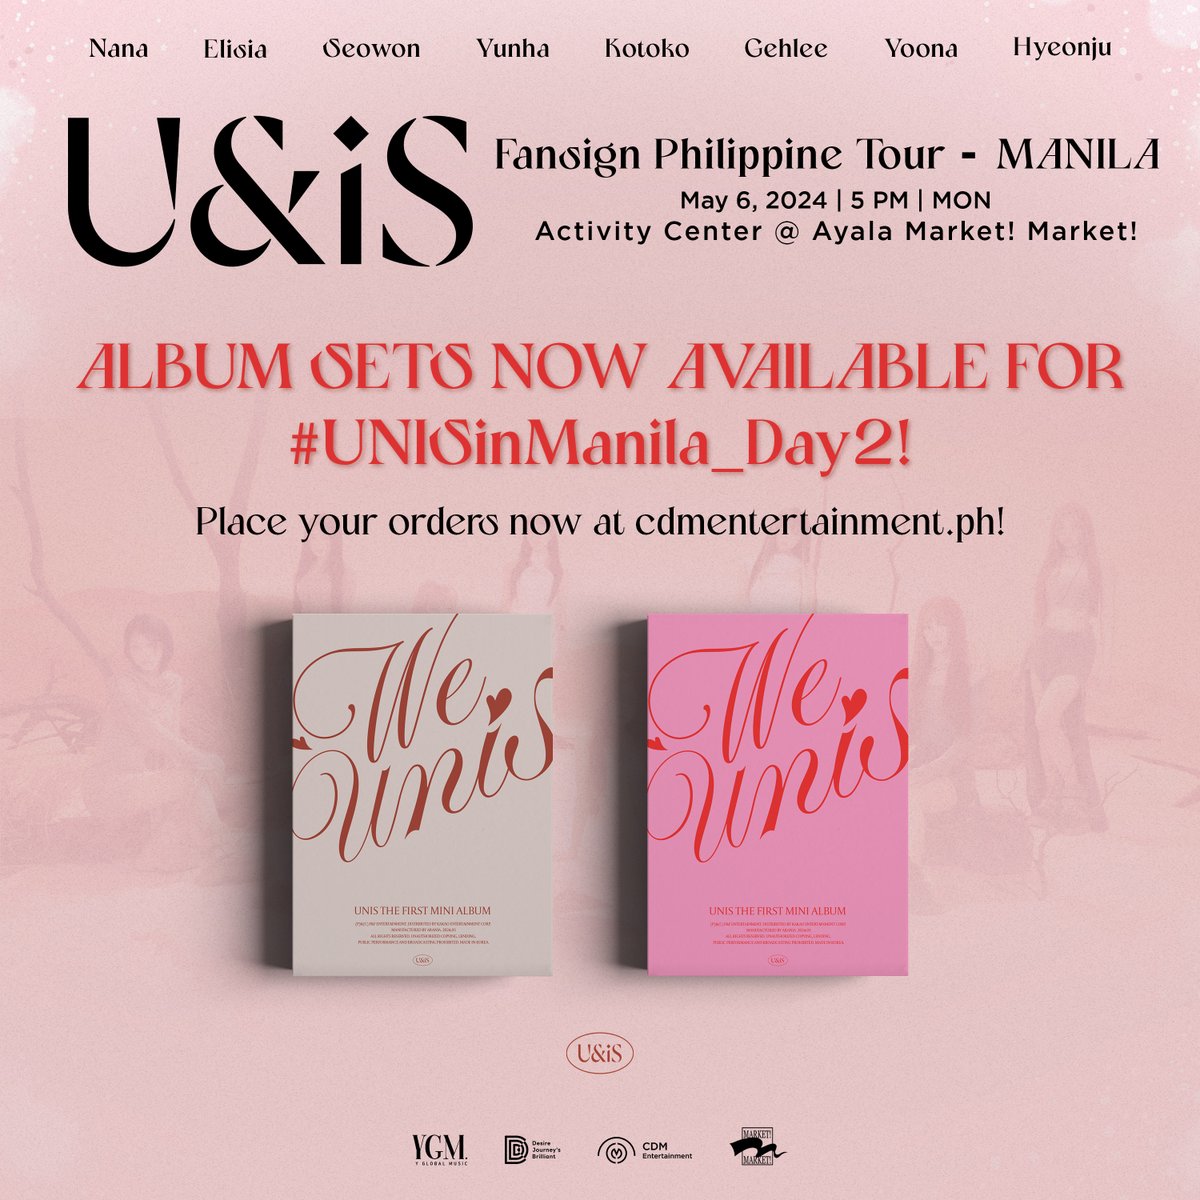 #UNISinMANILA_Day2 is open for album selling!

Place your orders now via cdmentertainment.ph 💿

This will be the last leg of #UNIS_Philippine_Tour so let's make it worthwhile for UNIS! 💖